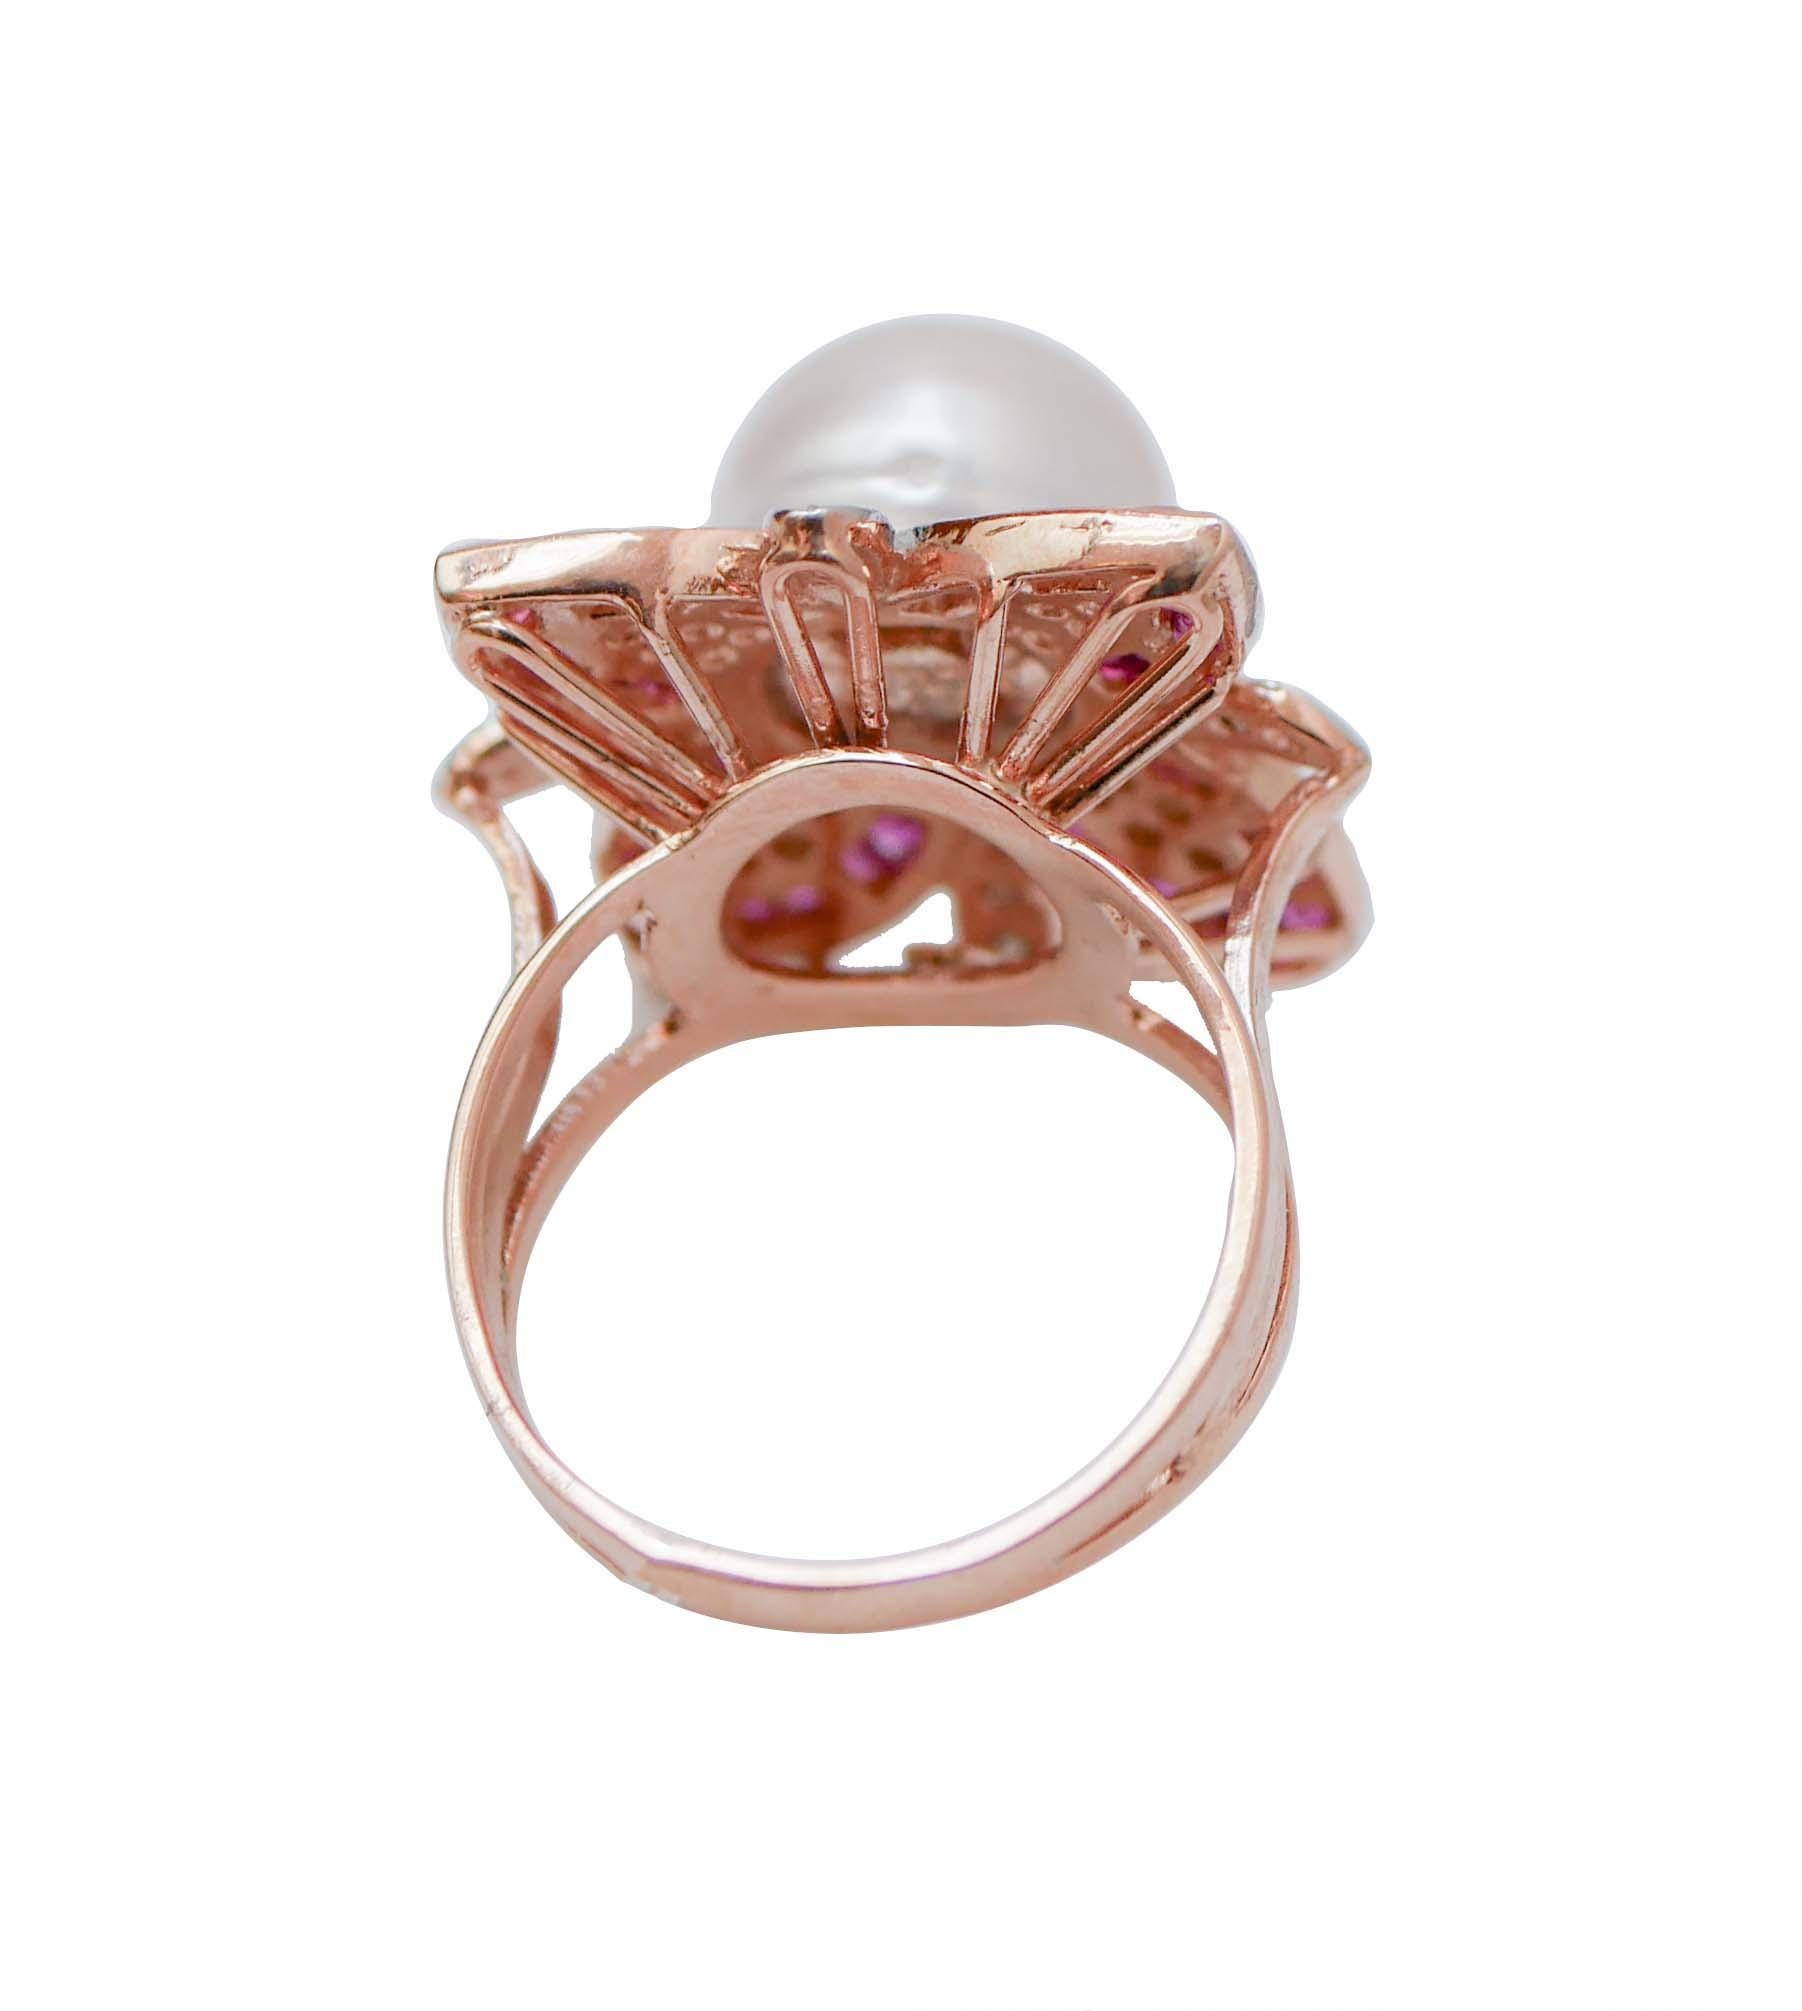 Retro Pearl, Rubies, Diamonds, Rose Gold and Silver  Ring. For Sale